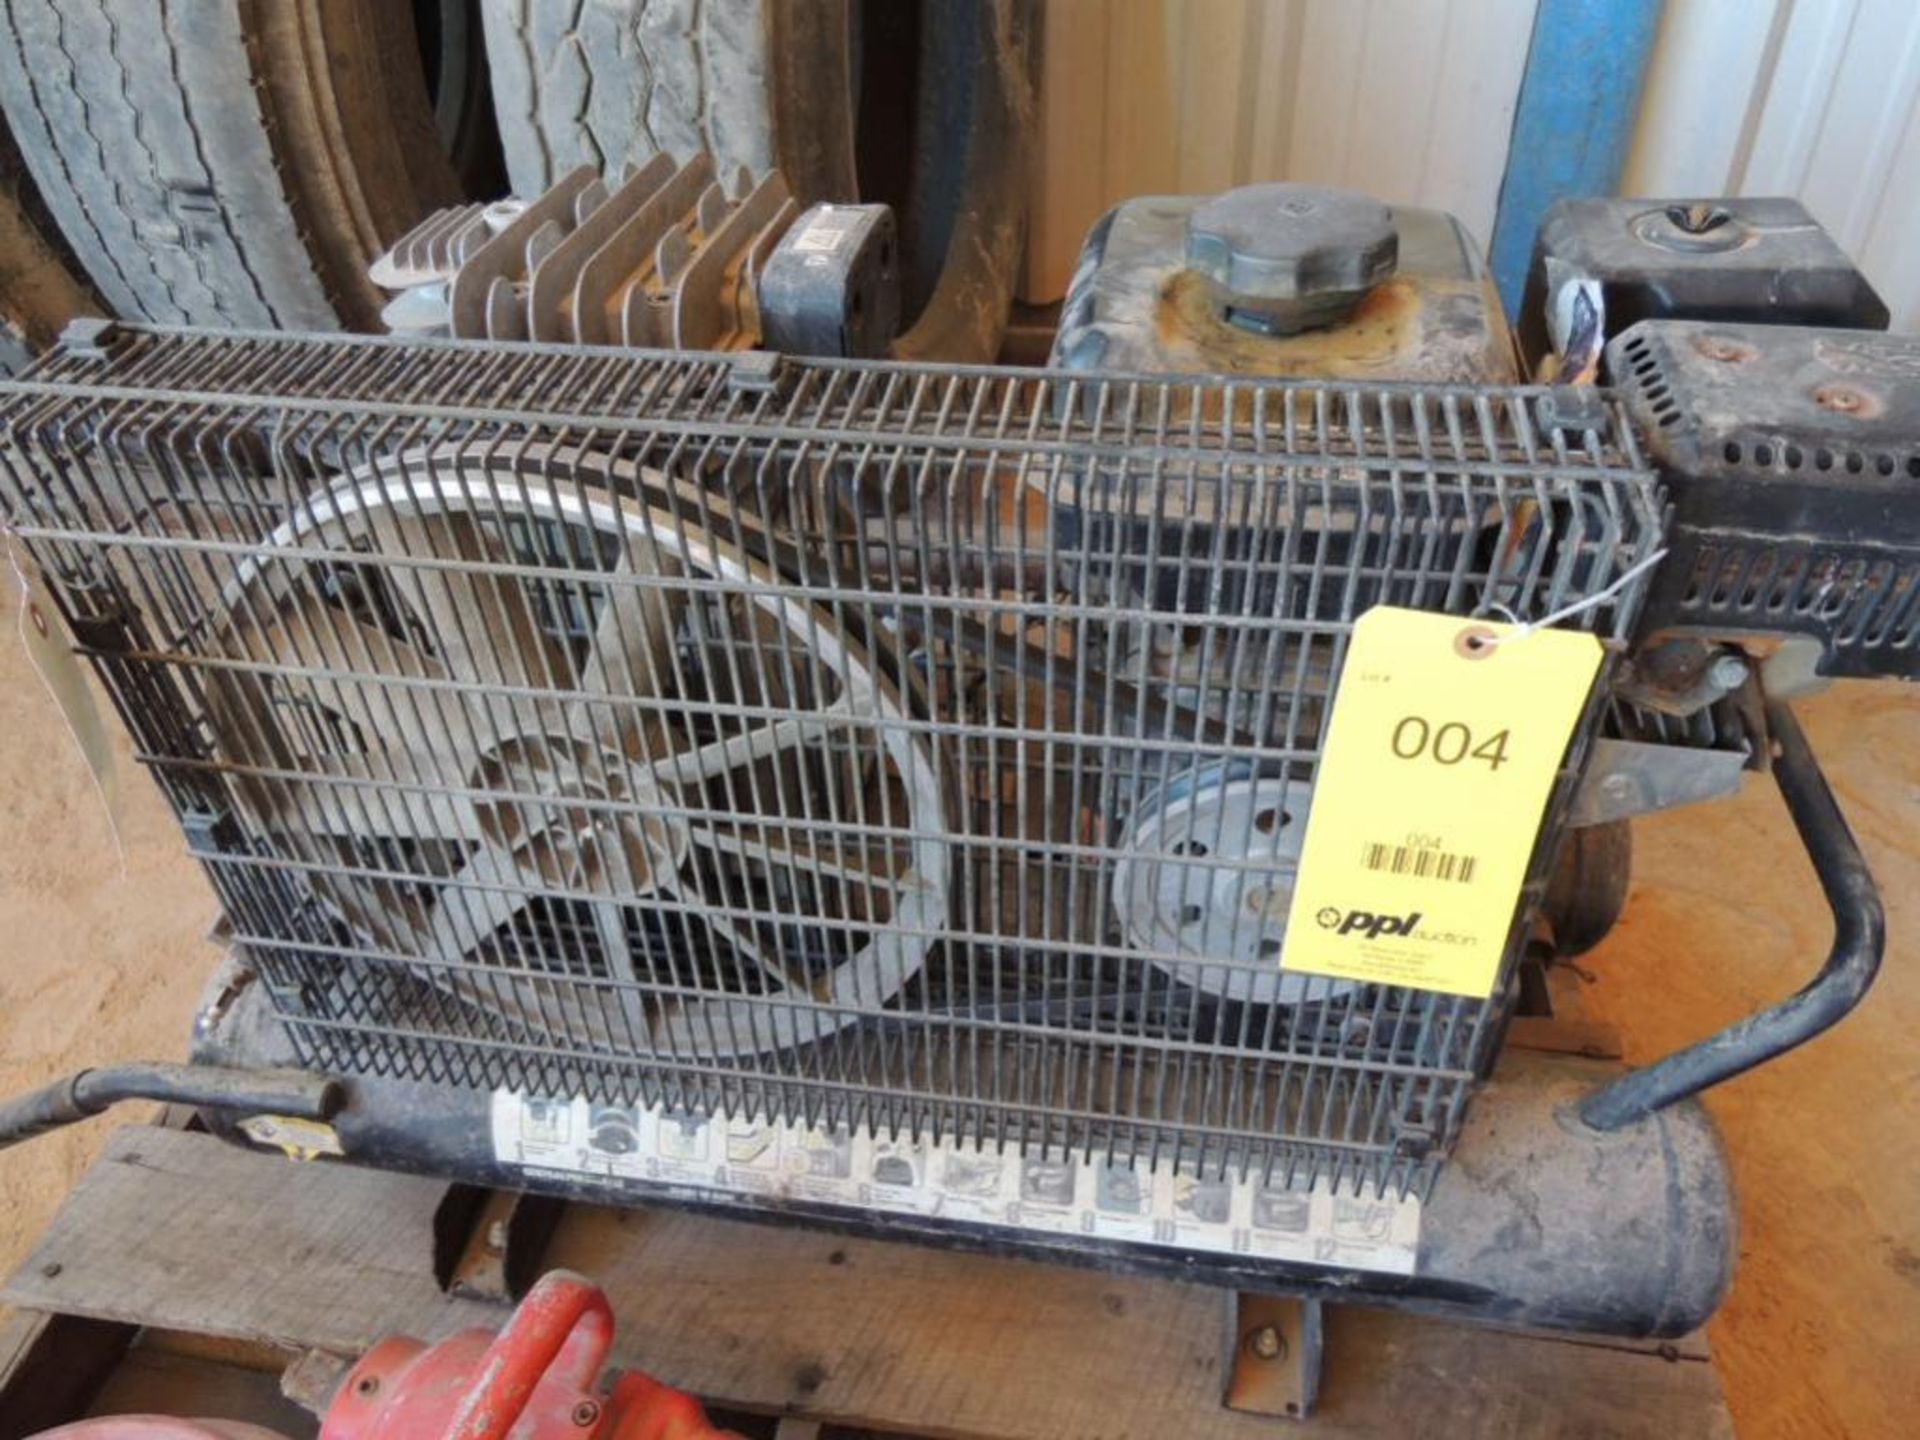 LOT: Central Pneumatic Portable Air Compressor, 1/2 in. & 3/4 in. Impacts, Paint Gun, Air Hose